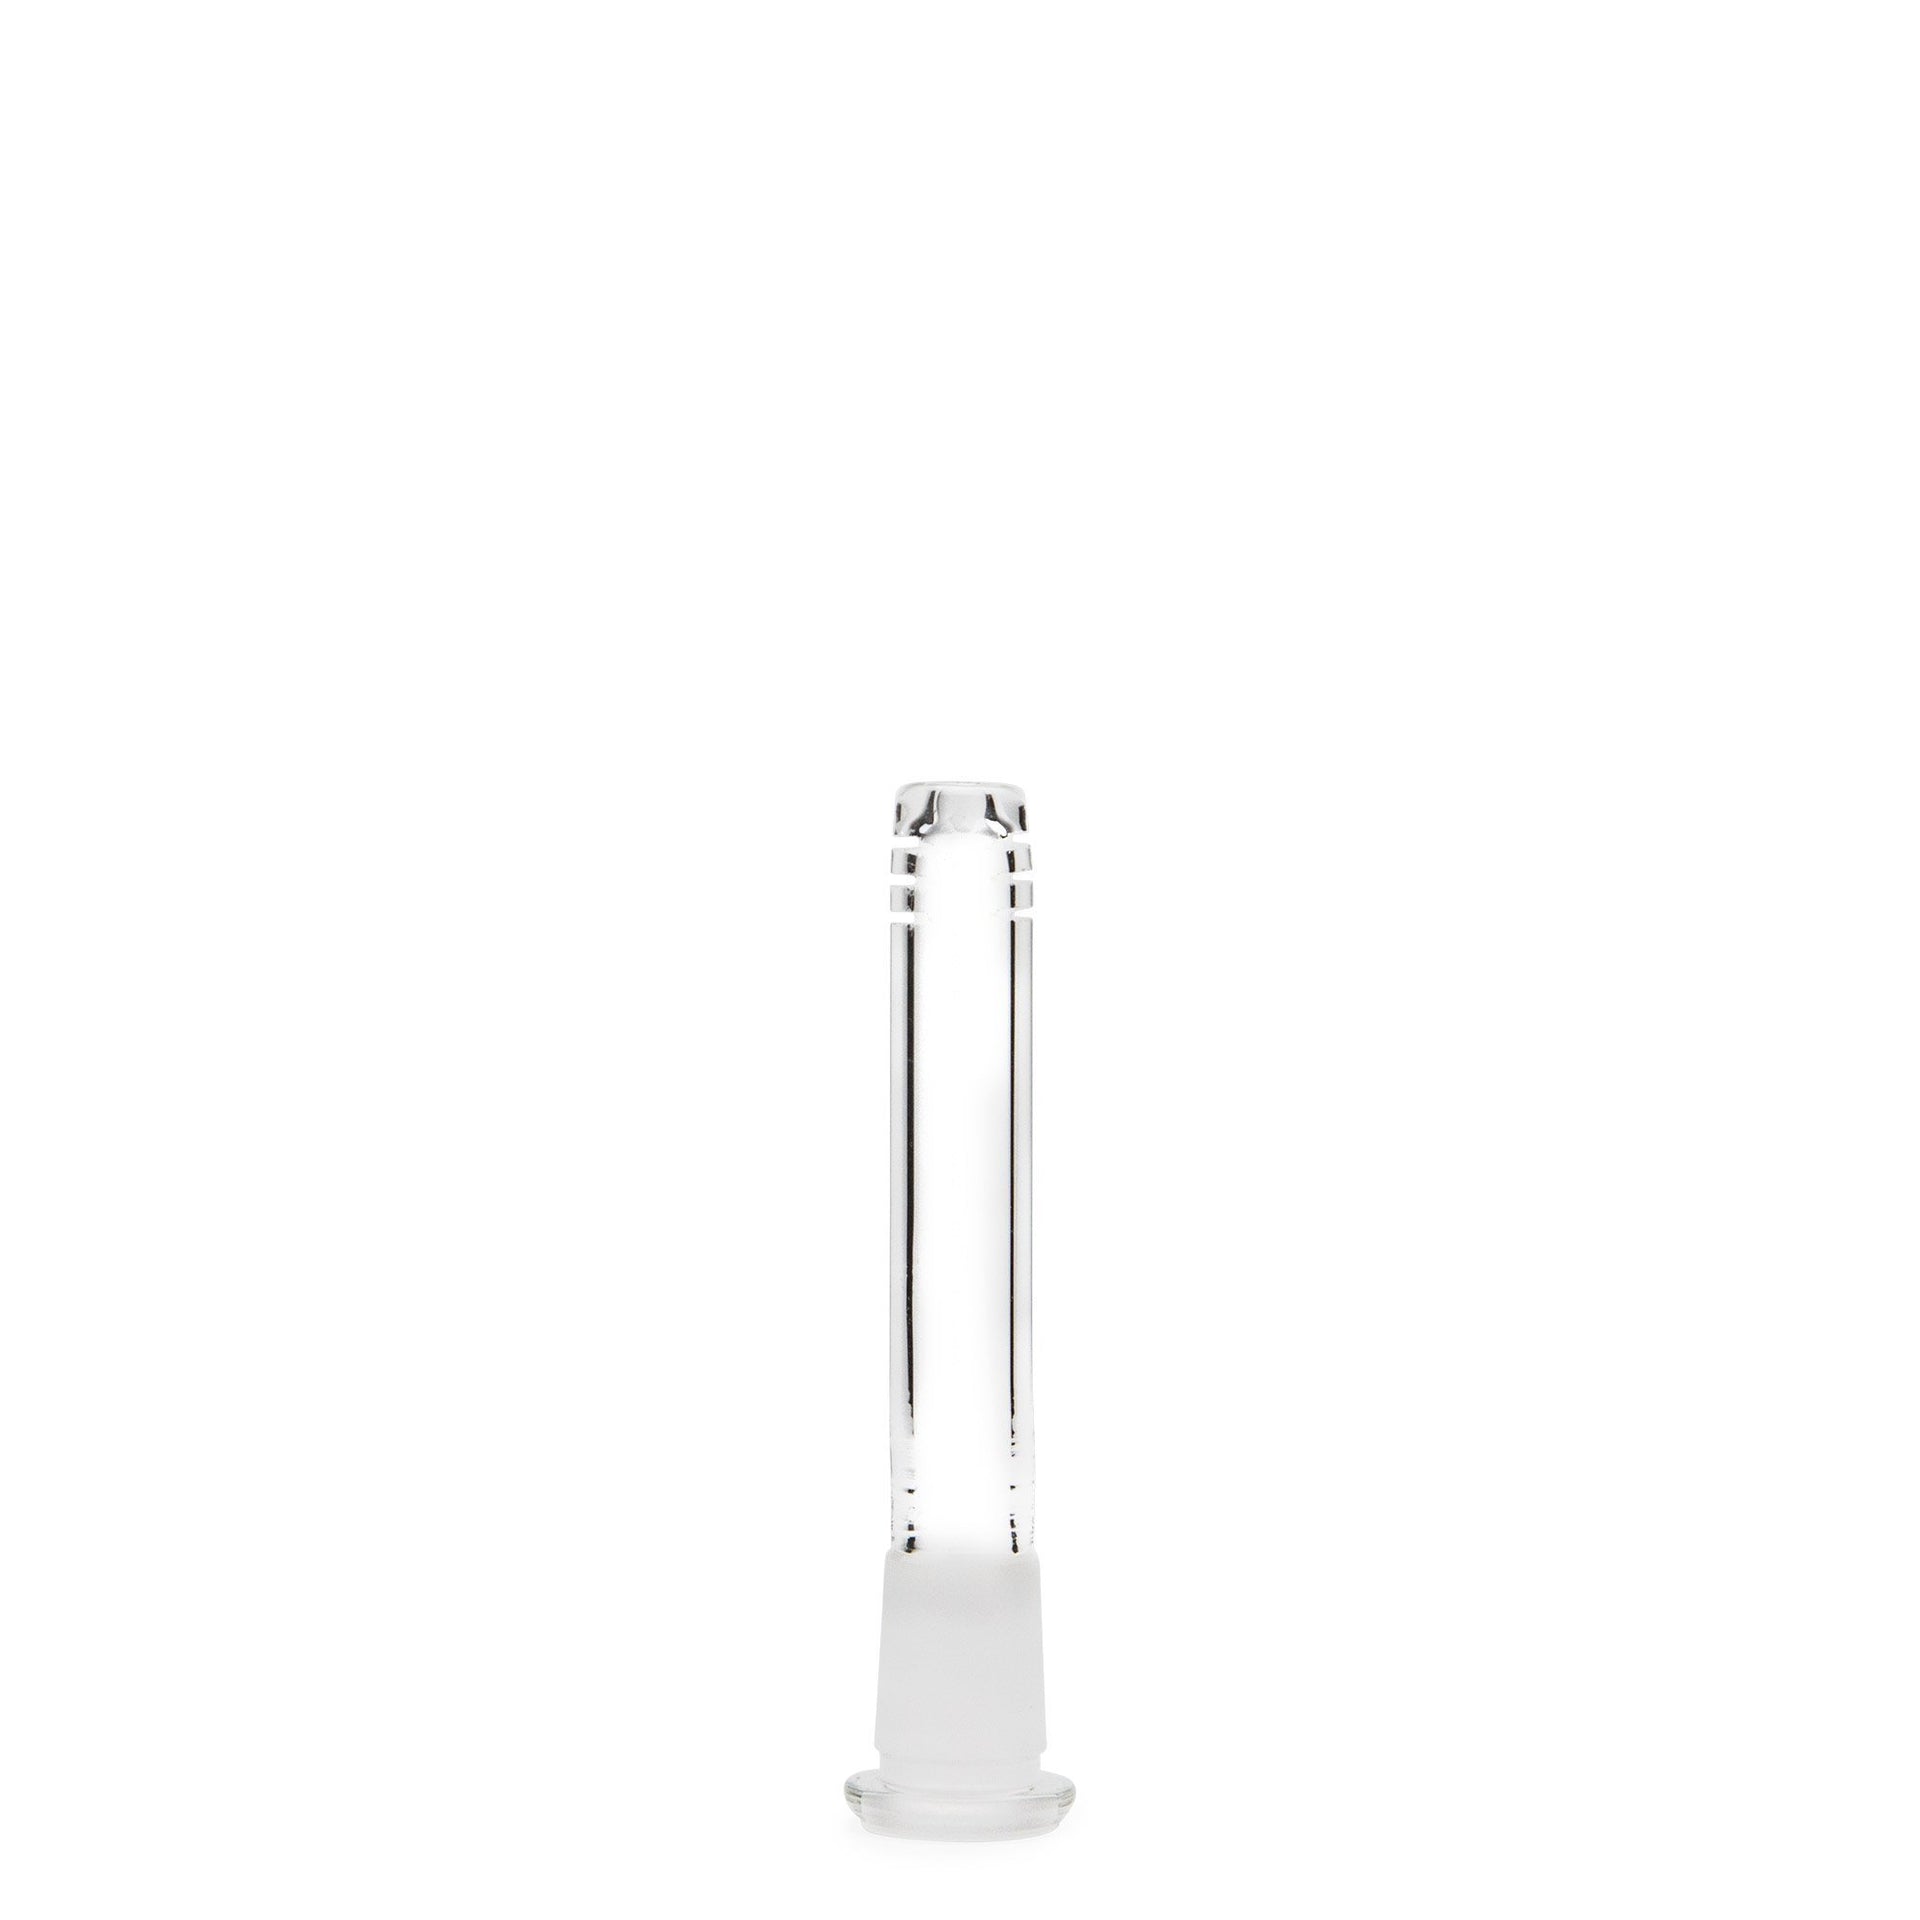 Low Profile Diffused Downstem